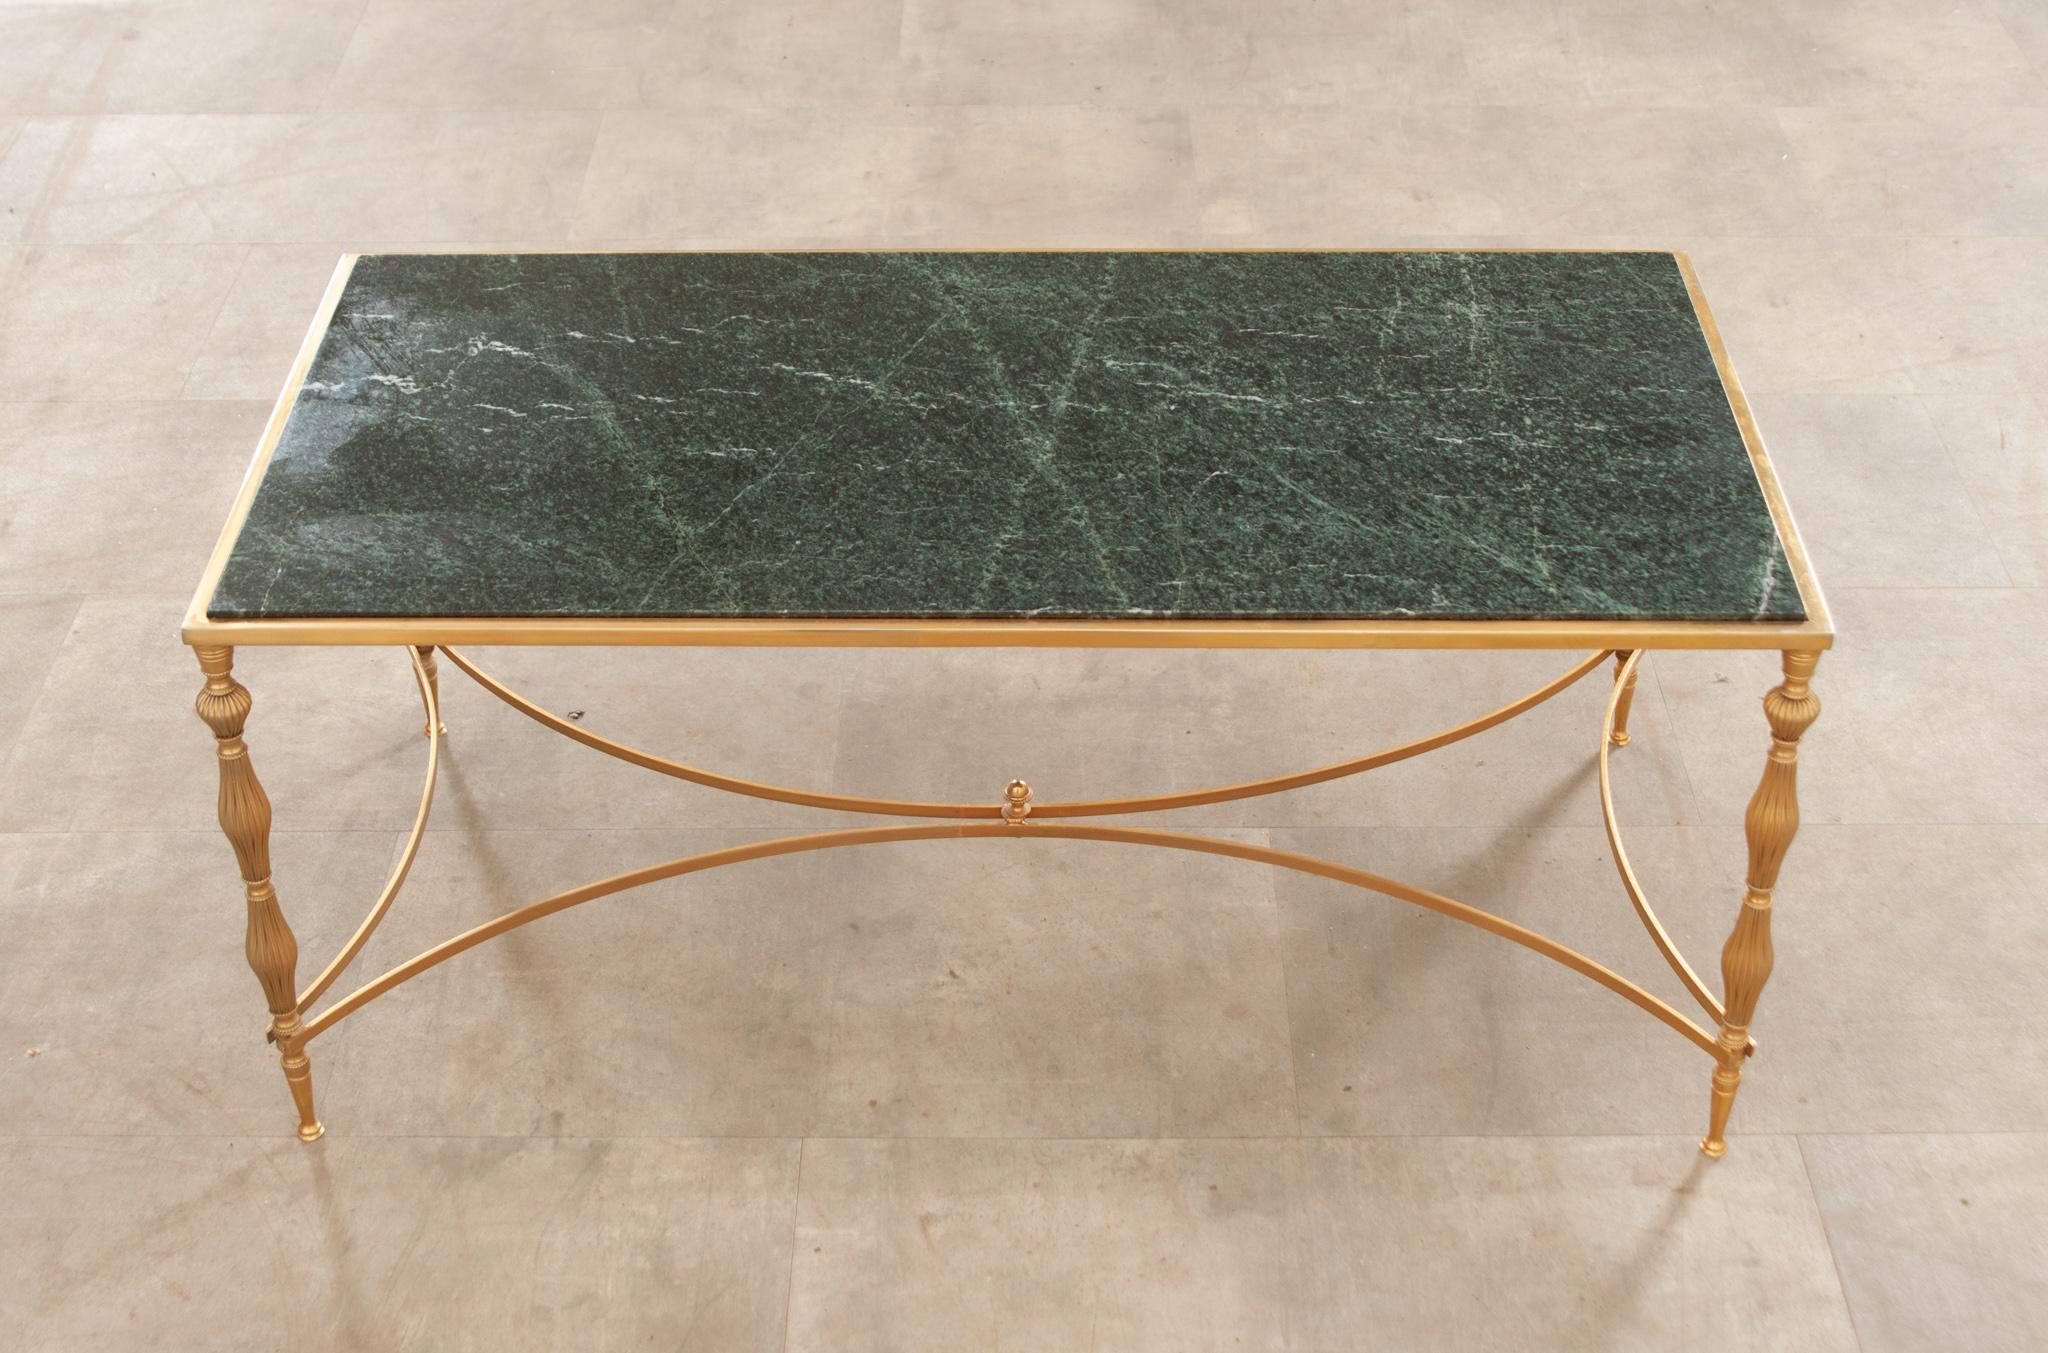 A beautiful French brass low table with a deep green polished marble top, circa 1970, featuring expertly turned and fluted legs connected to a curved stretcher with a decorative finial. Vibrant and wonderfully patinated. This fantastic little table